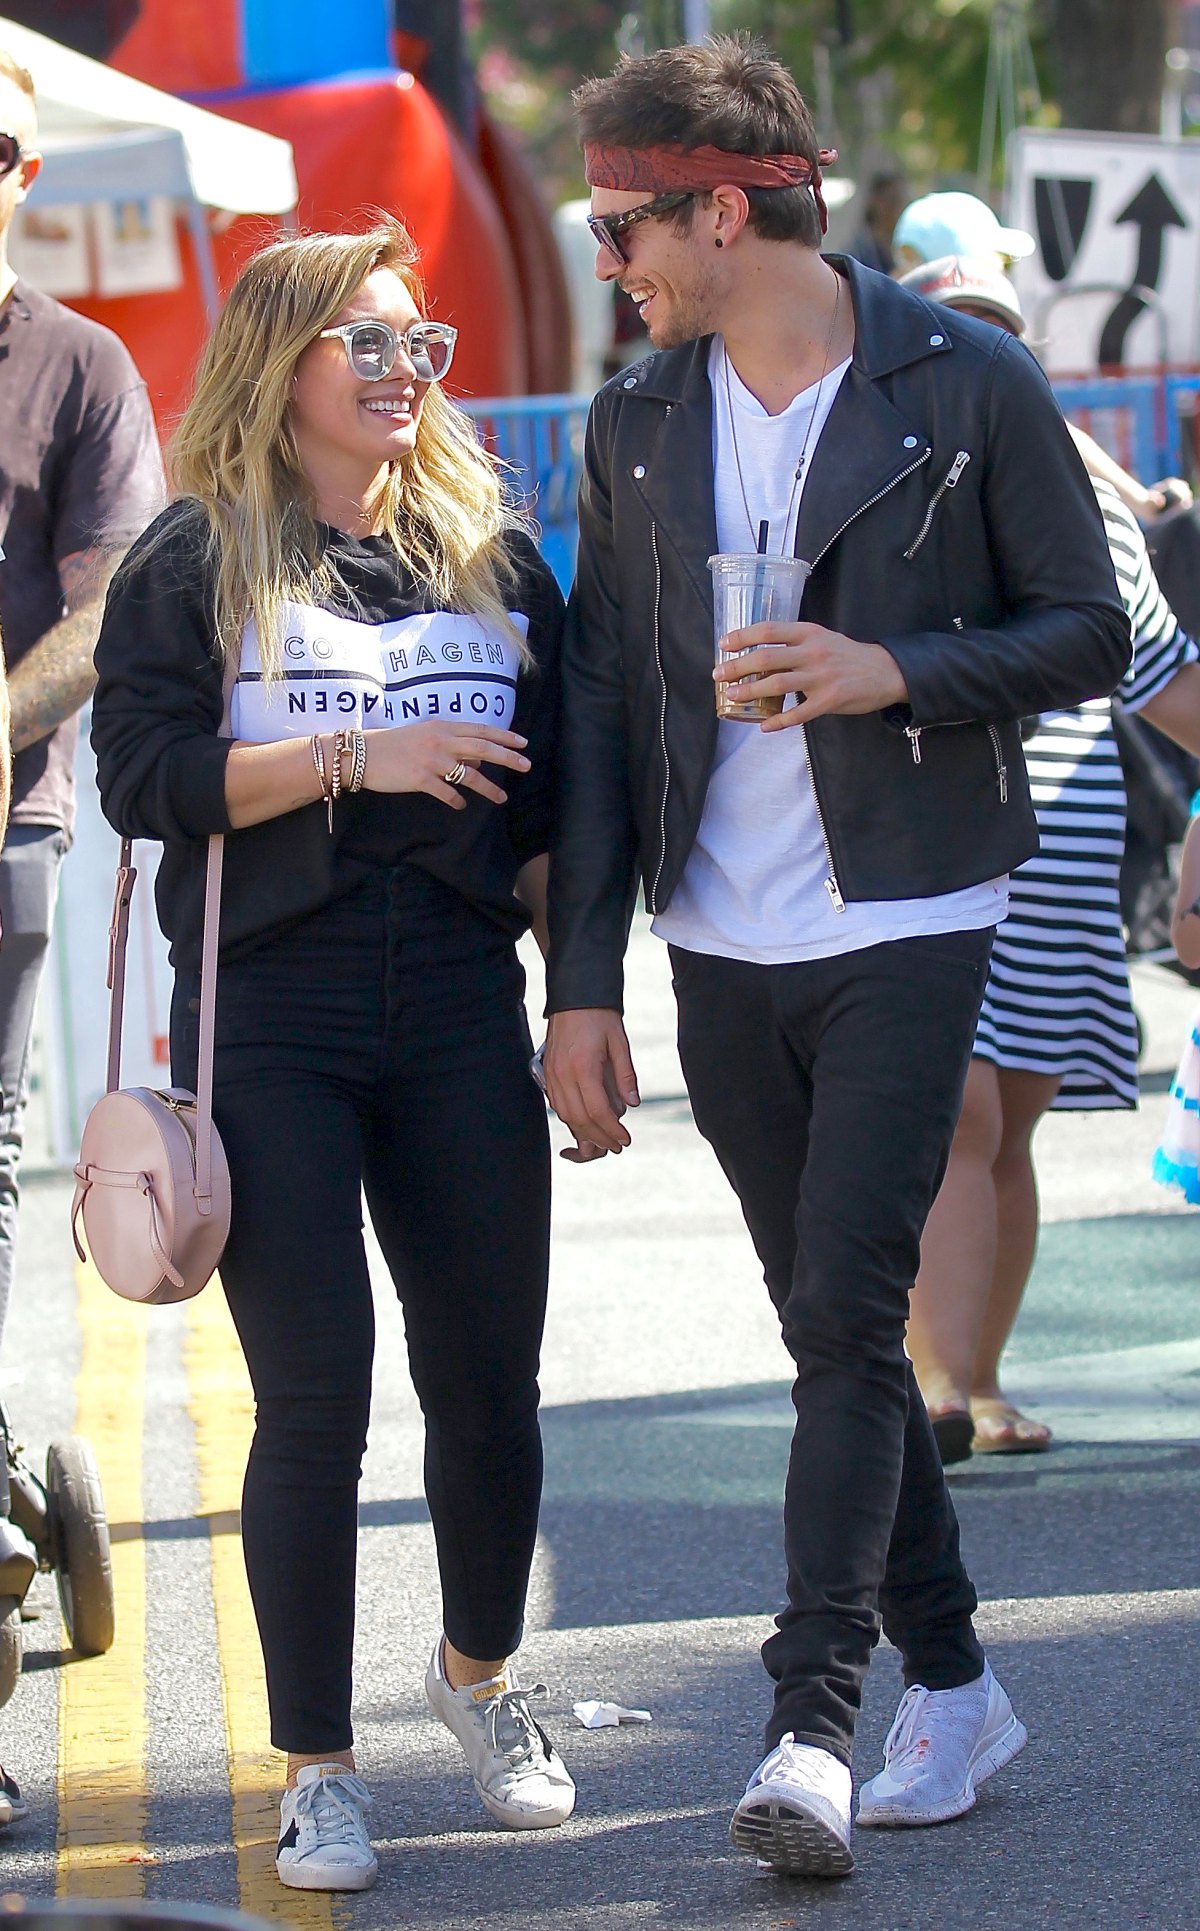 Candid Upskirt Hilary Duff Sexy - Hilary Duff and Matthew Koma: A Timeline of Their Relationship